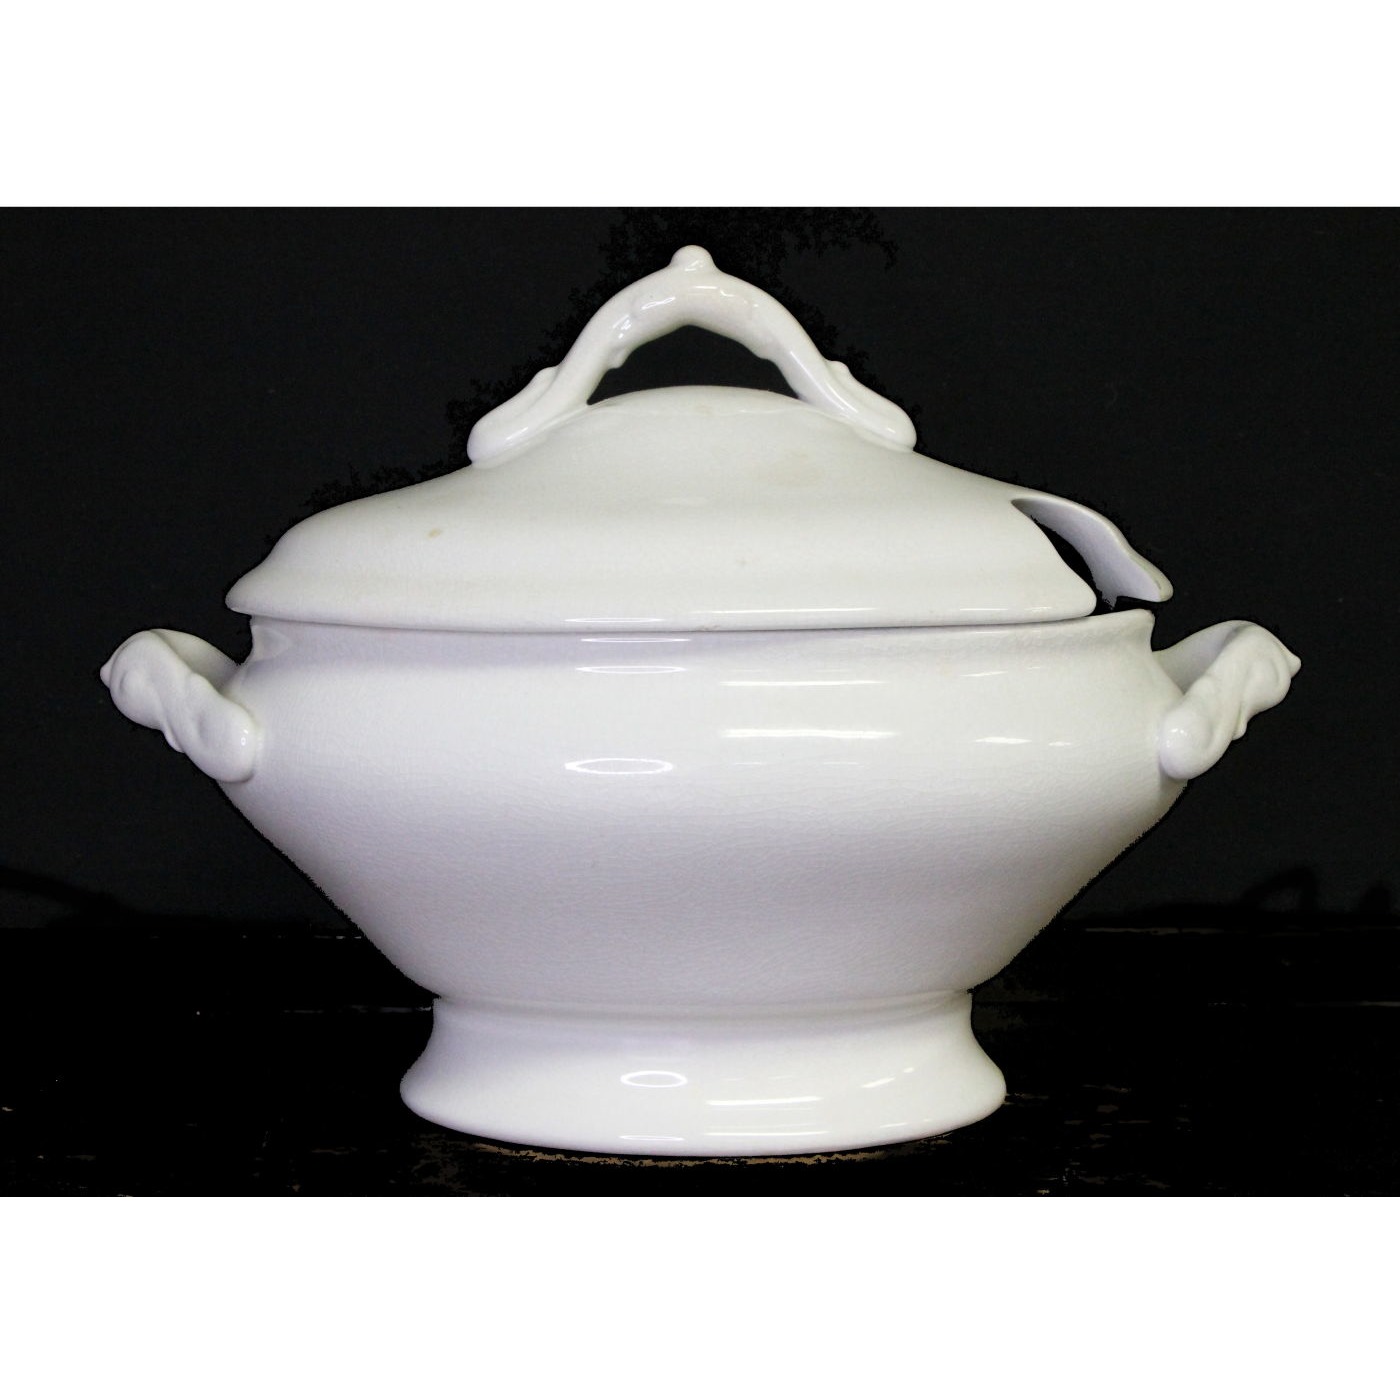 Super Simple Soup Ironstone Tureen with Strap Handles